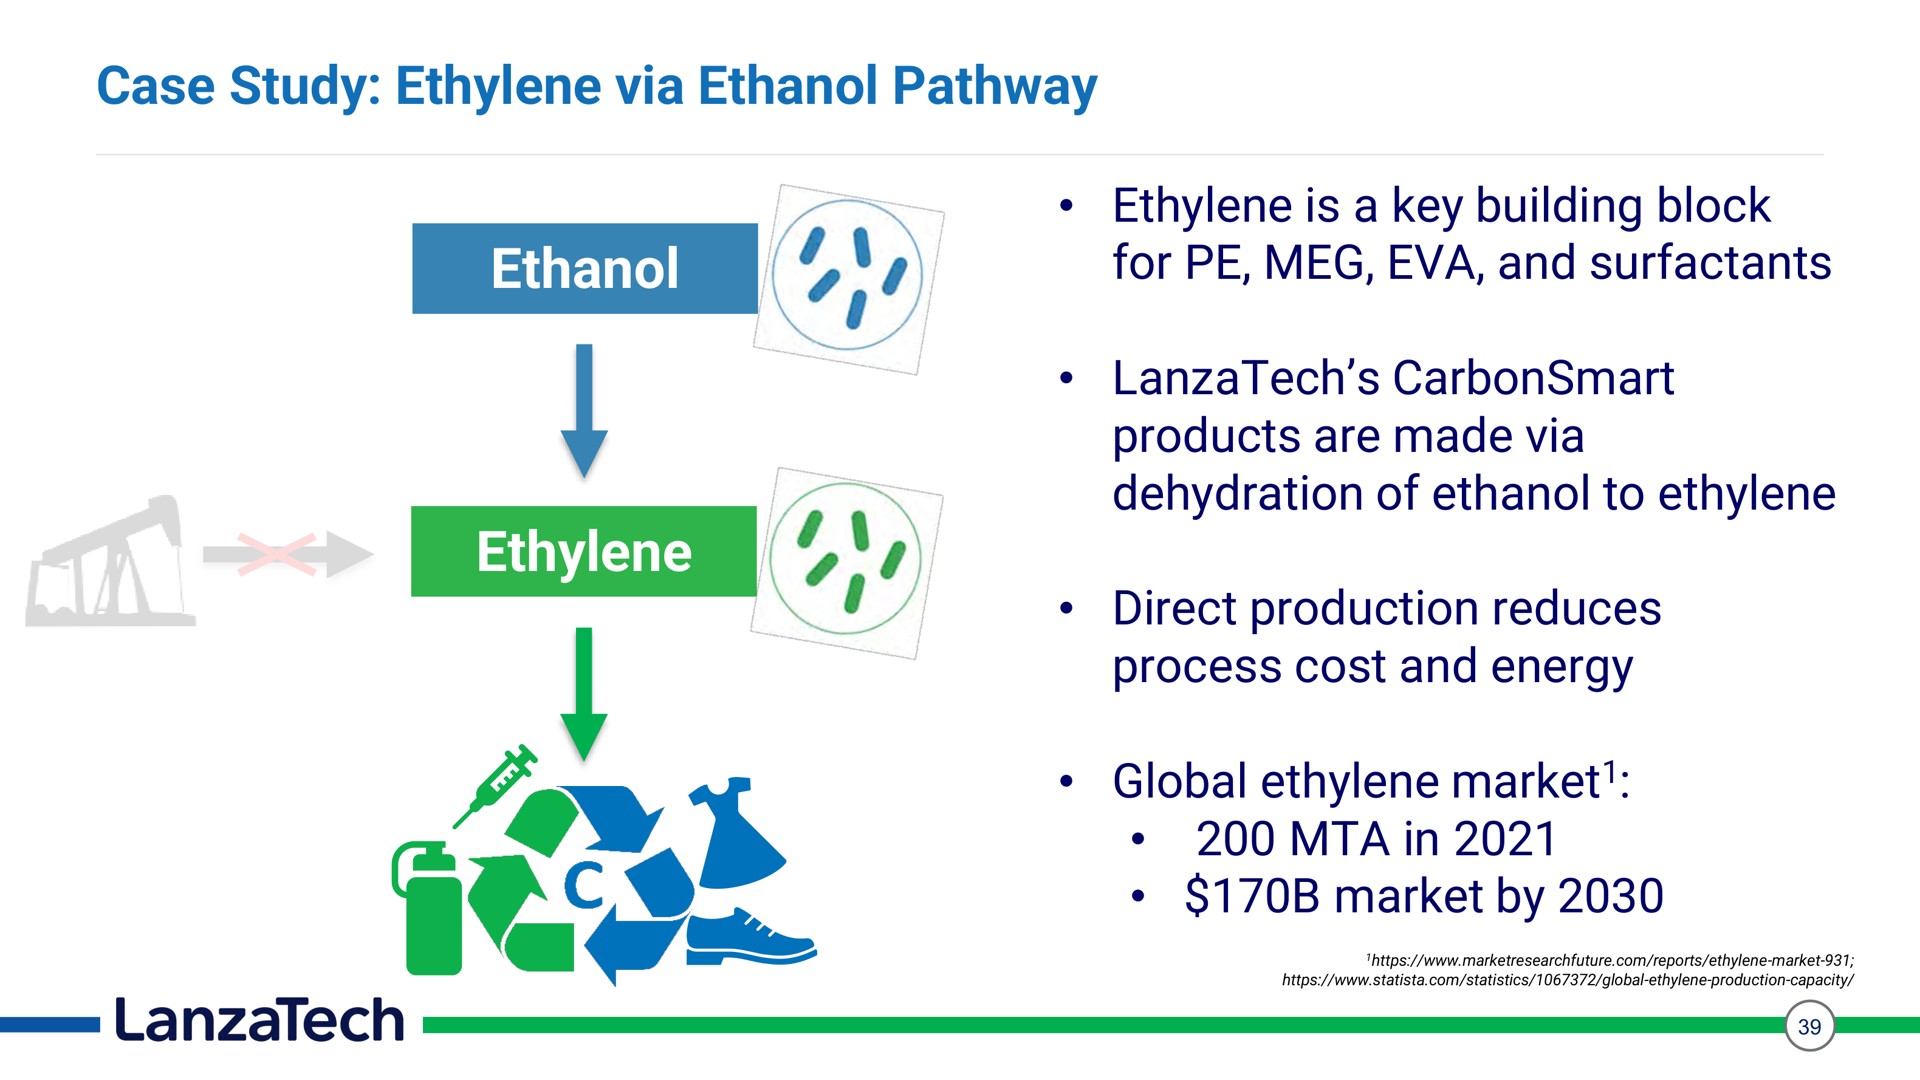 case study ethylene via ethanol pathway ethanol ethylene ethylene is a key building block for and surfactants products are made via dehydration of ethanol to ethylene direct production reduces process cost and energy global ethylene market in market by kina one | LanzaTech